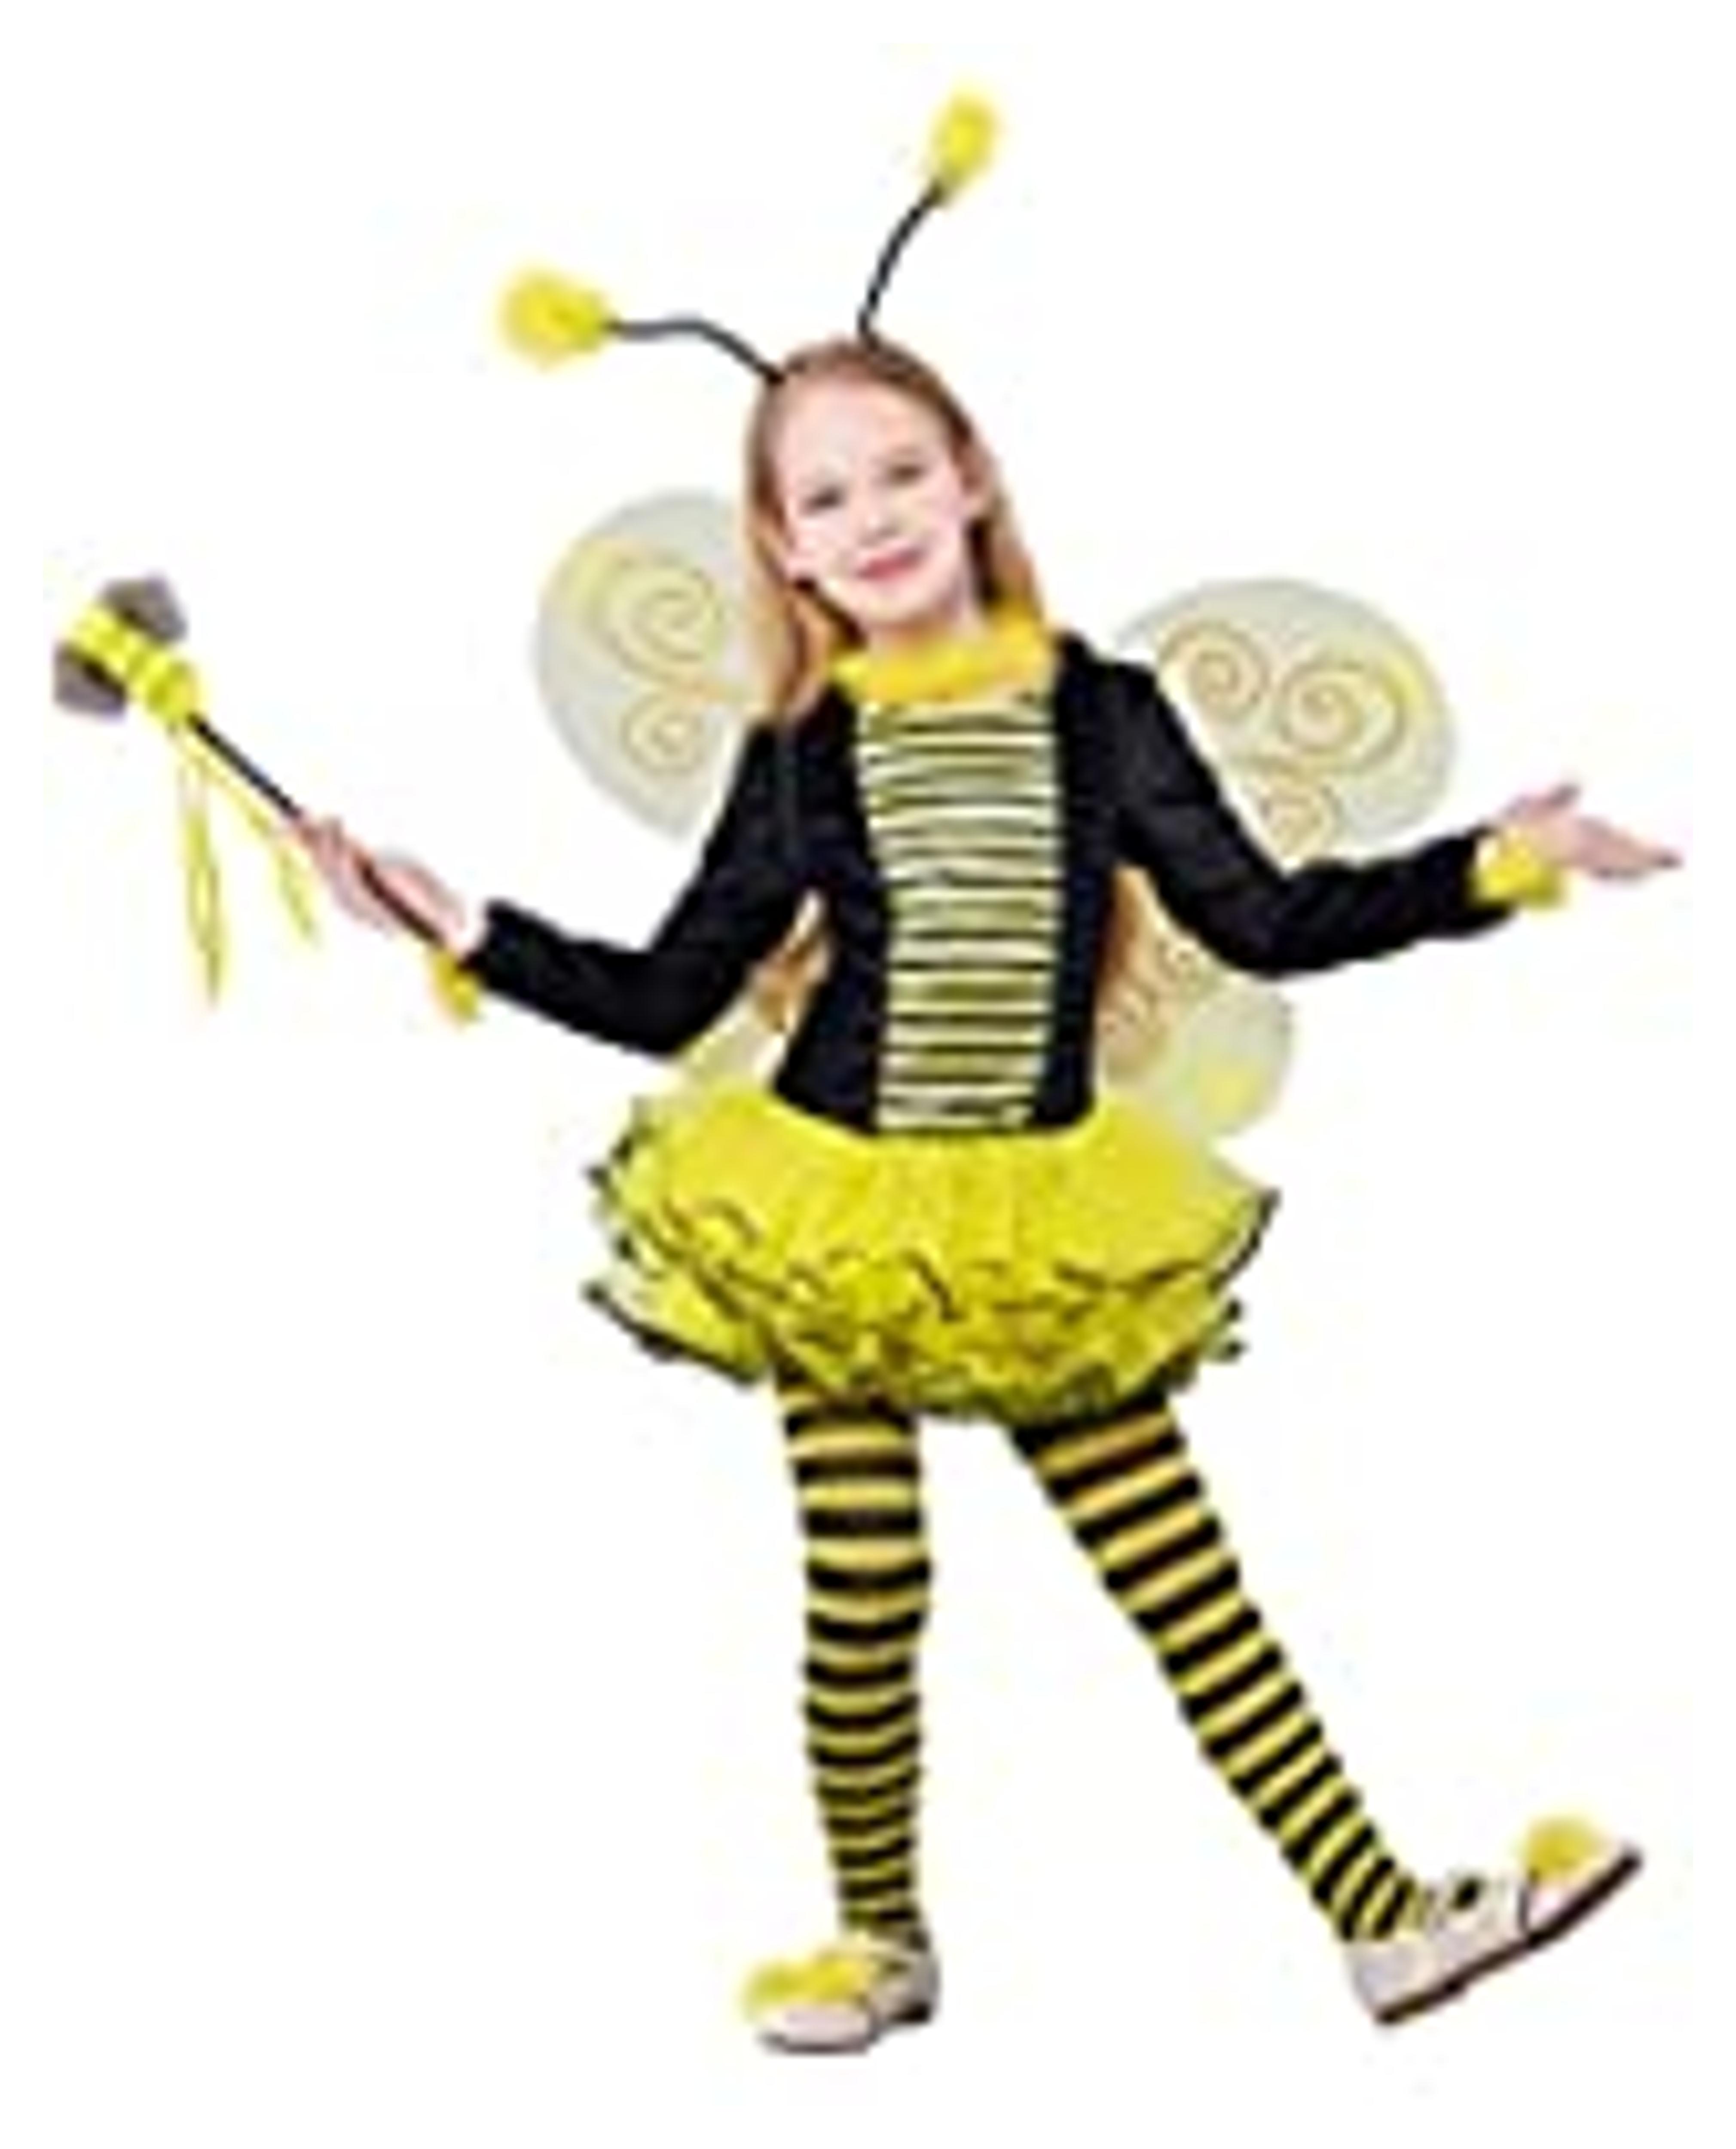 Amazon.com: Girls Bee Costume, Deluxe Animal Fancy Dress Outfit with Wings (10pcs Set) 9-10 Years : Toys & Games